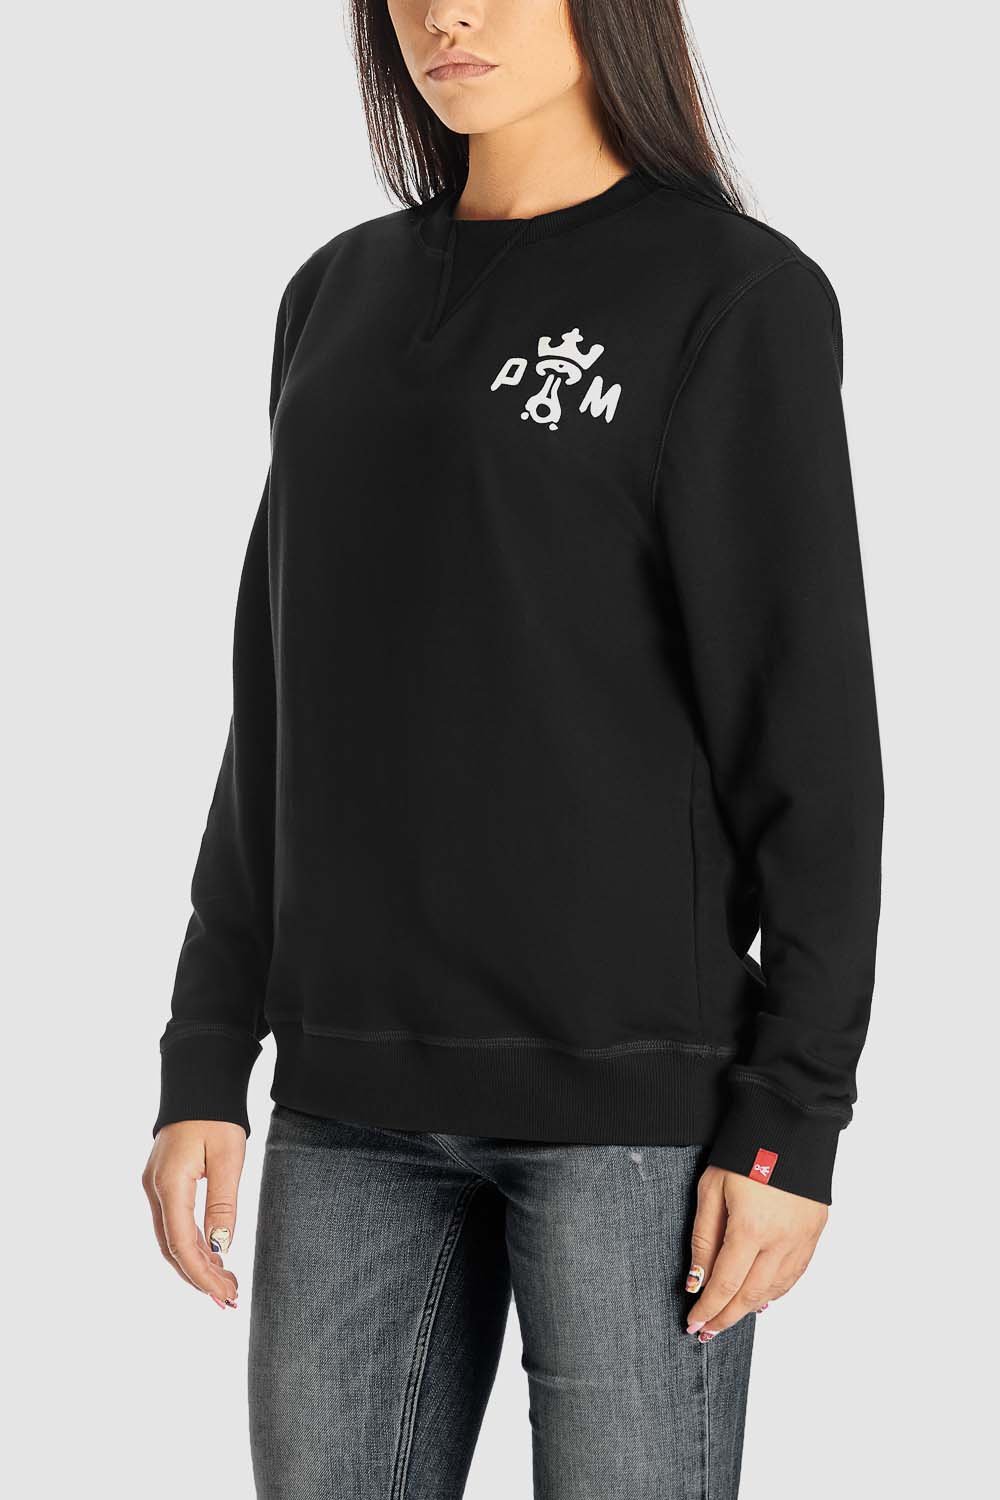 A women wearing black motorcycle sweatshirt with white Pando Moto logo on the chest